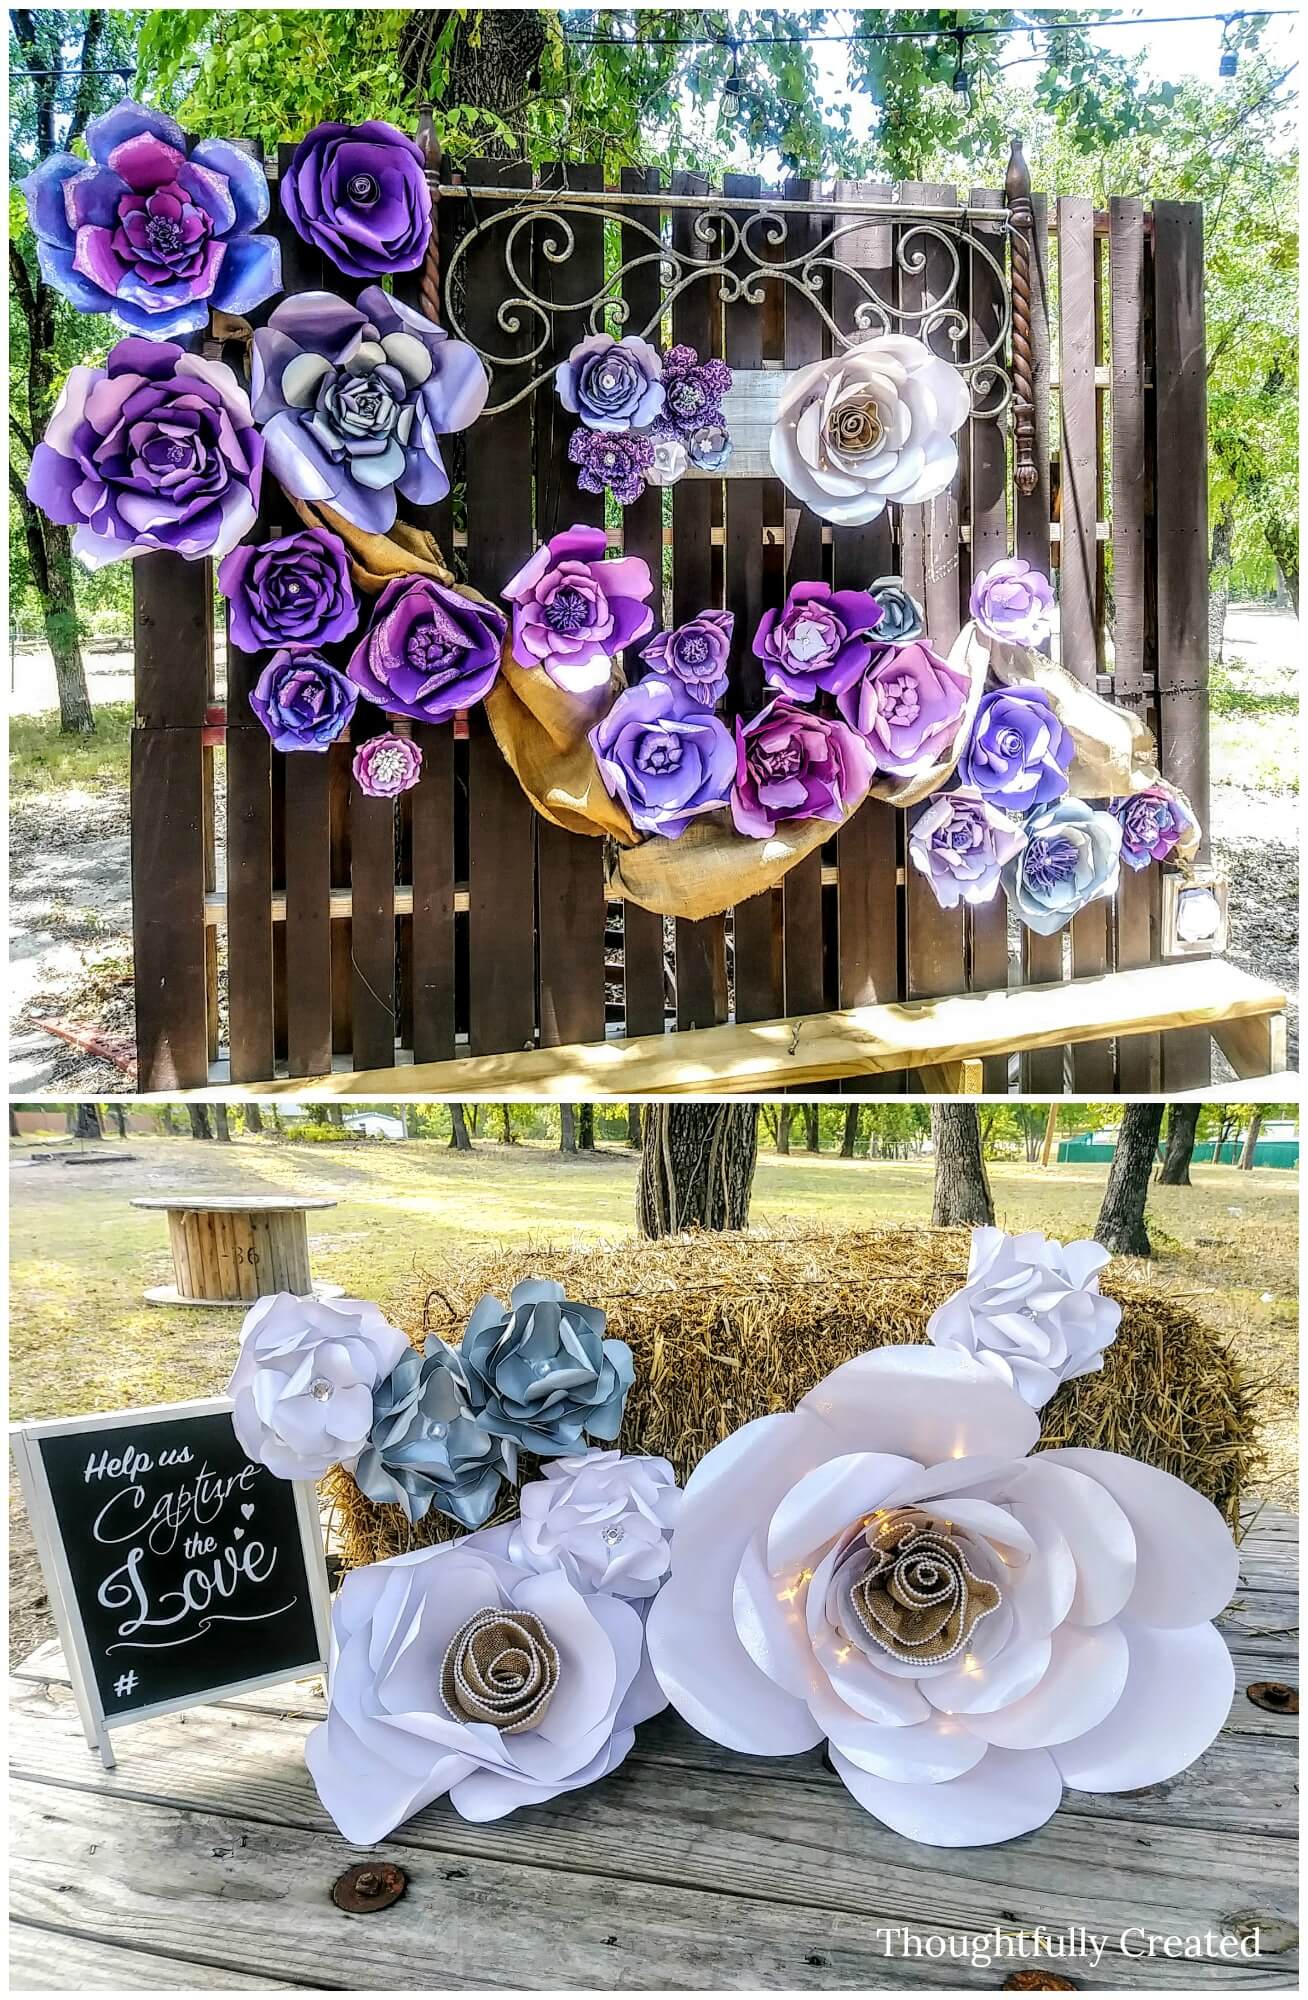 A collage of two paper flower backdrops. The top photo features paper flowers in various shades of blue and purple hanging on a wooden fence. The bottom photo features mostly white flowers, all giant and arranged around hay bales. The largest flower has white fairy lights wrapped around it.